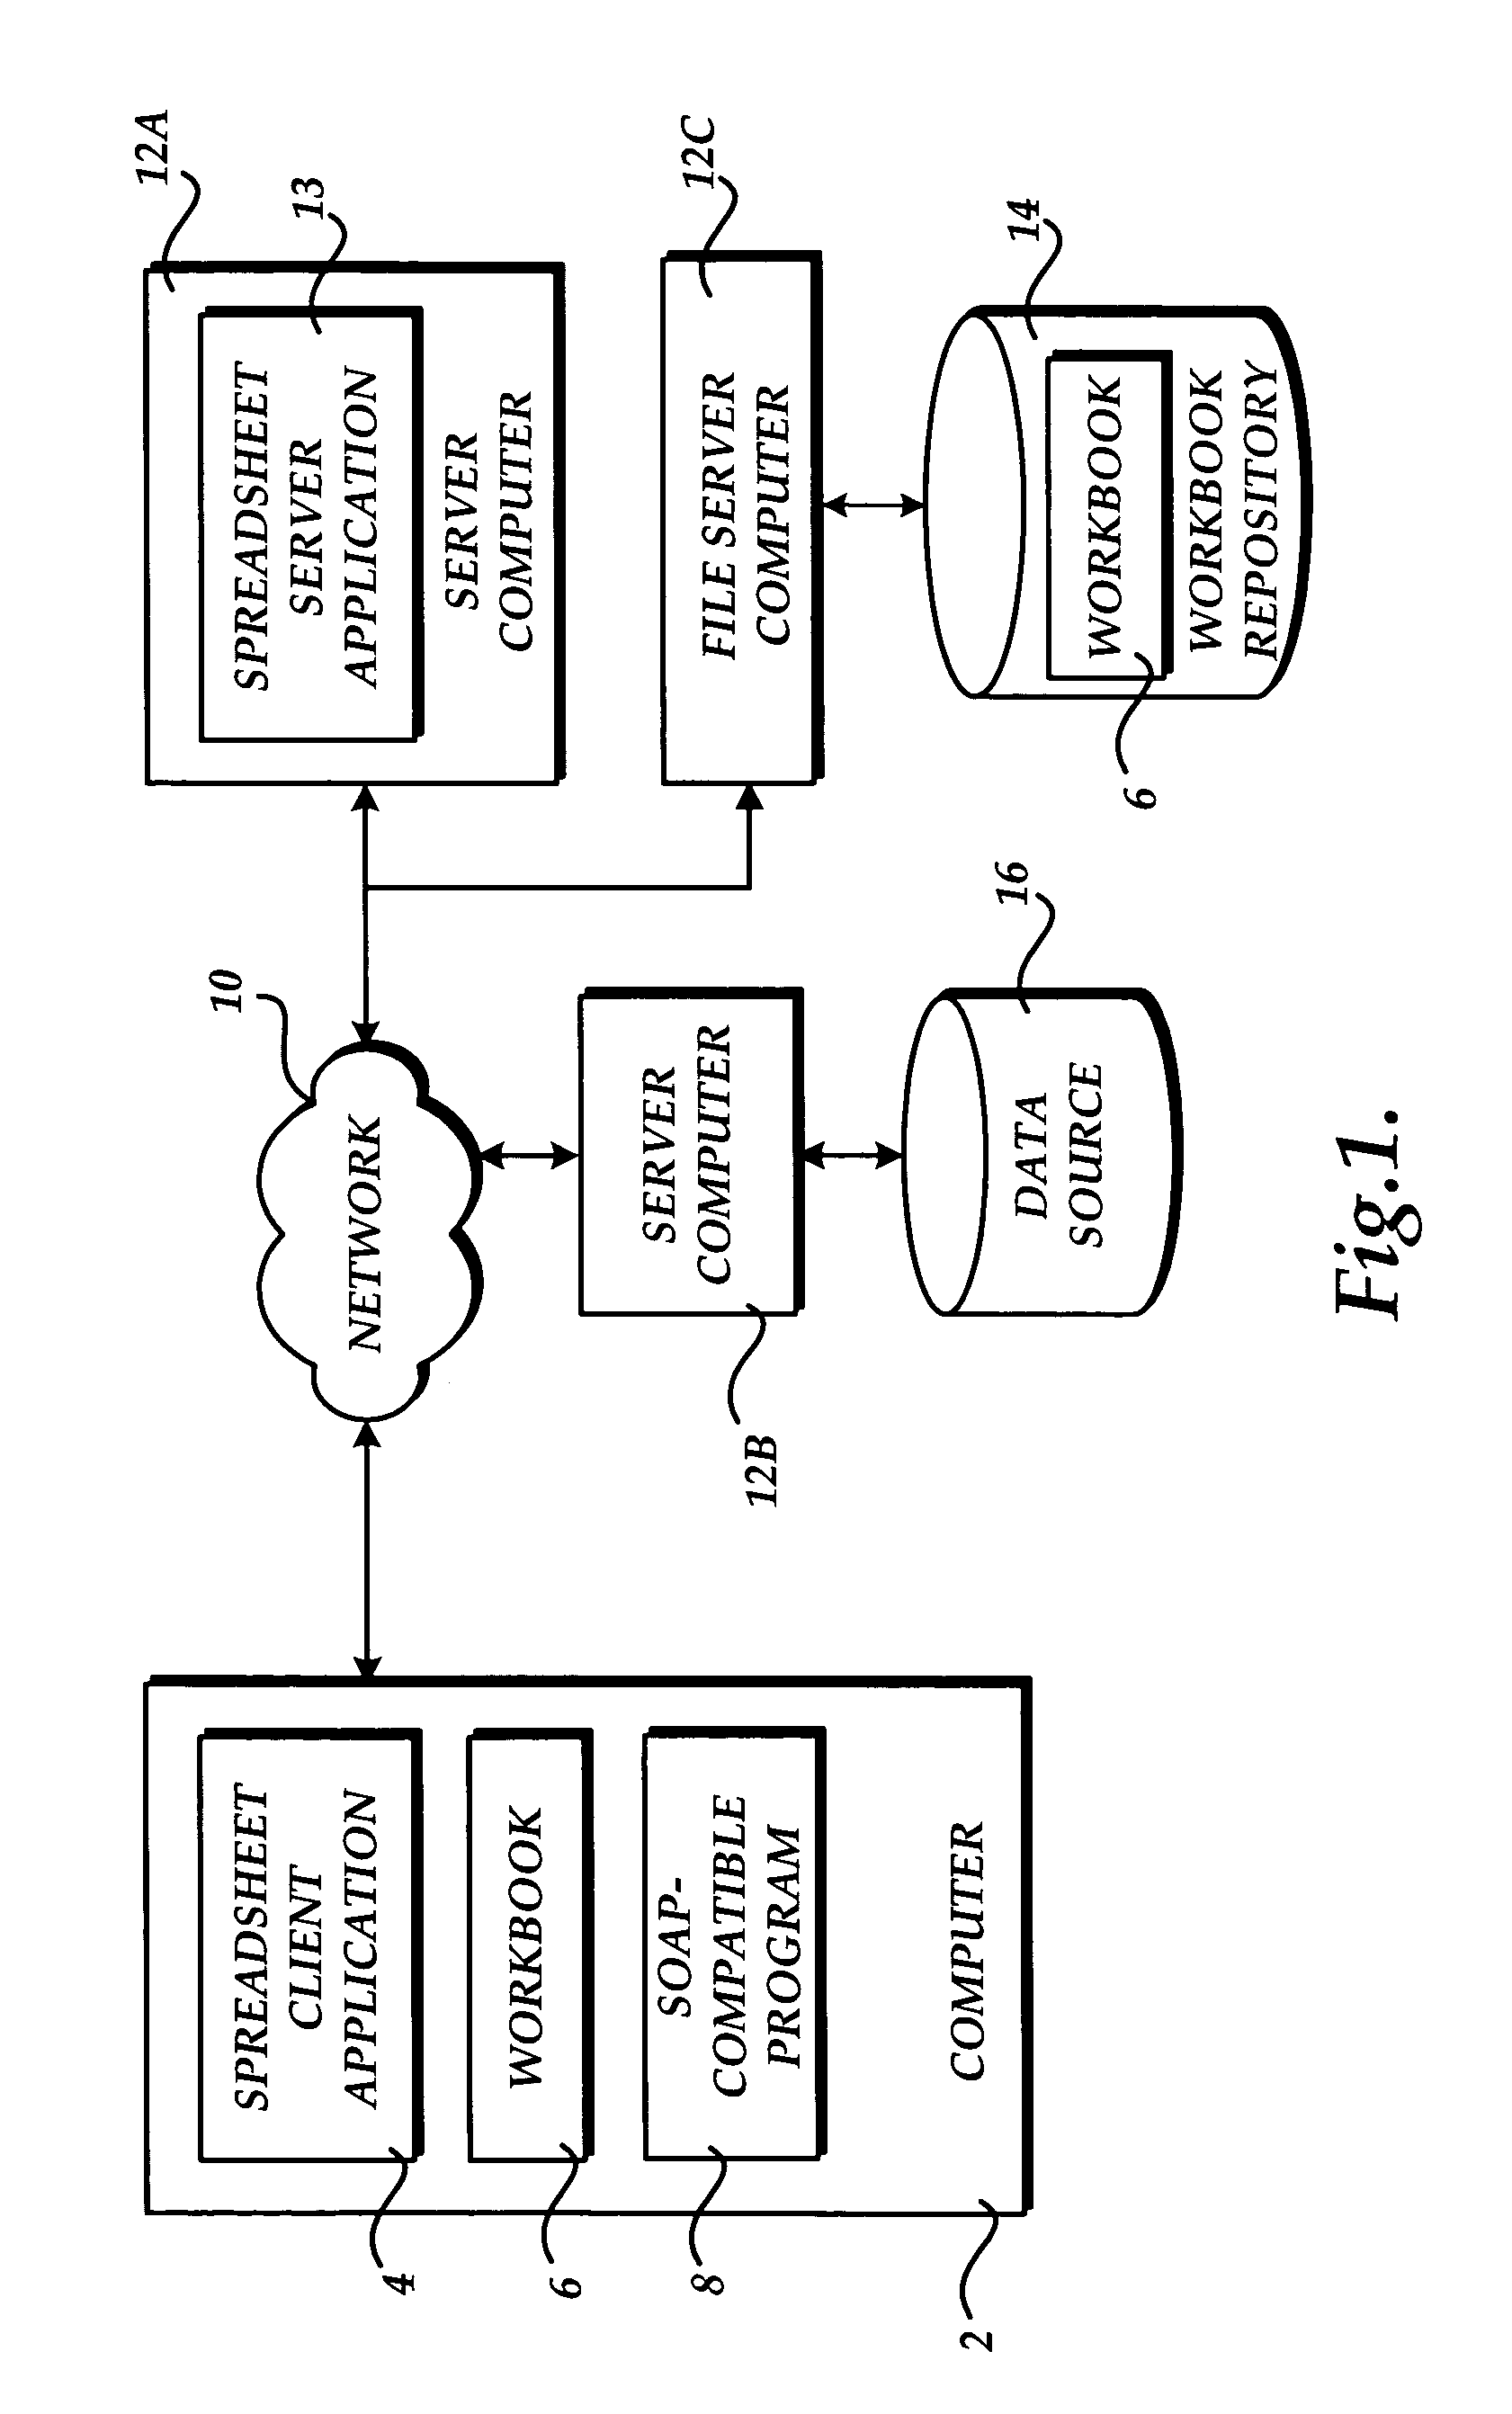 Method, system, and apparatus for providing access to workbook models through remote function calls